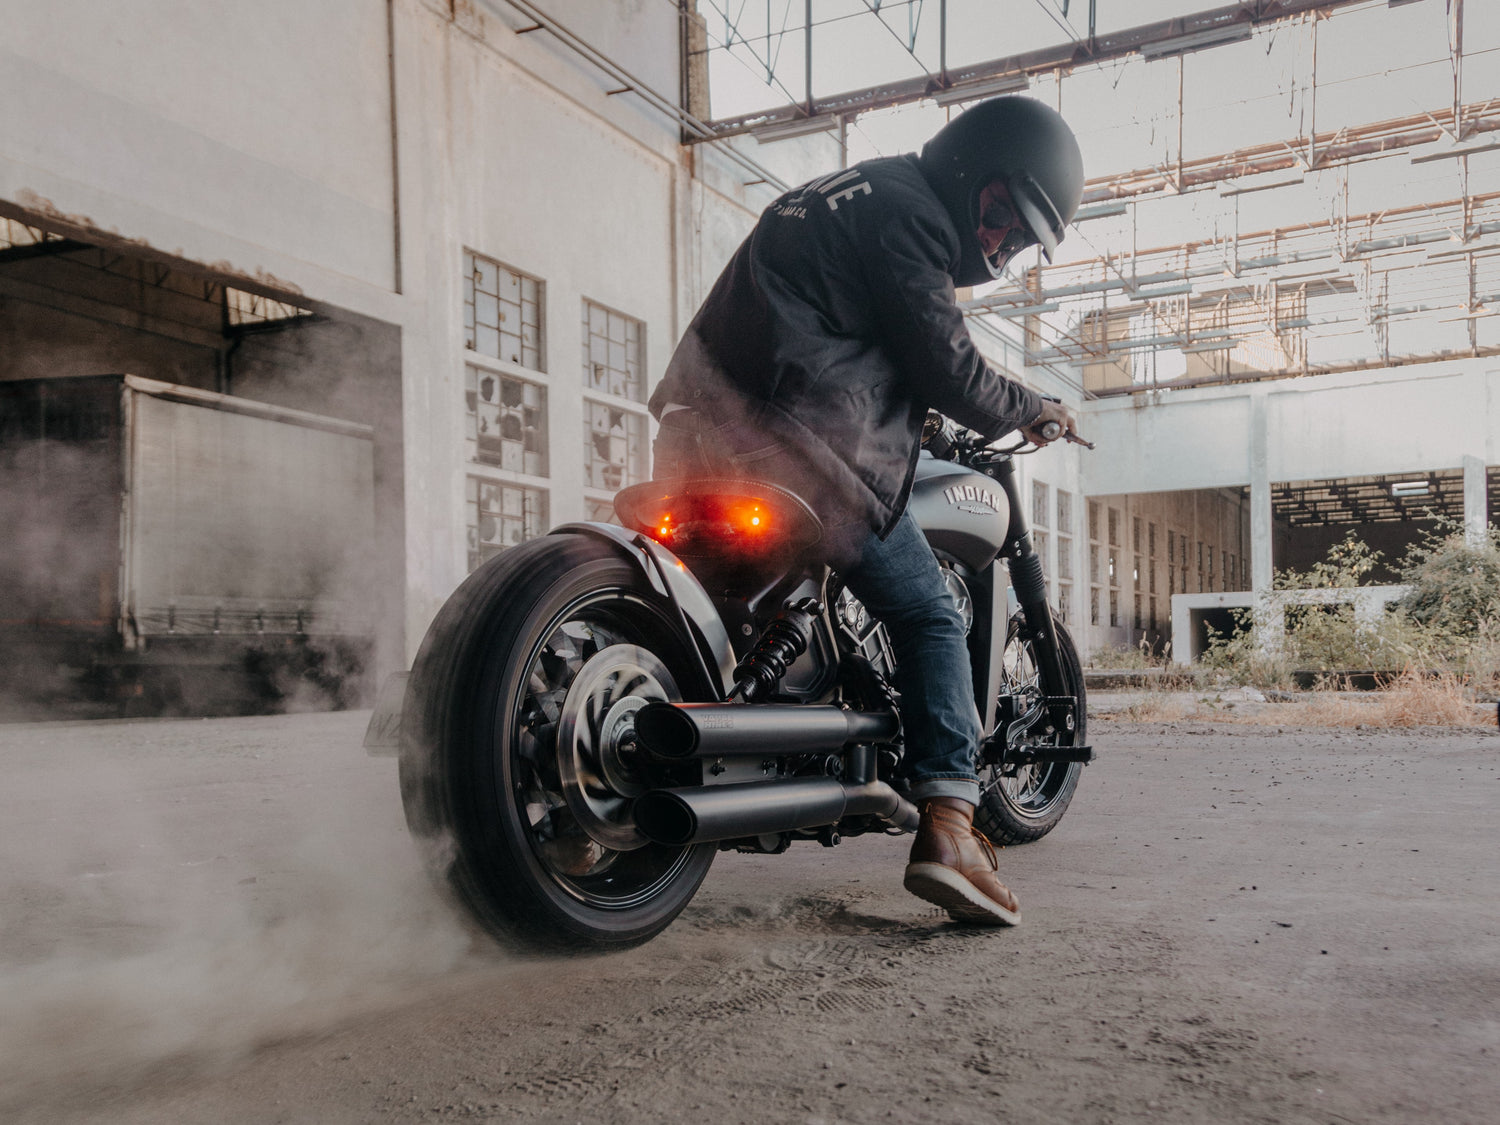 Indian motorcycle burnout in an abandoned factory.